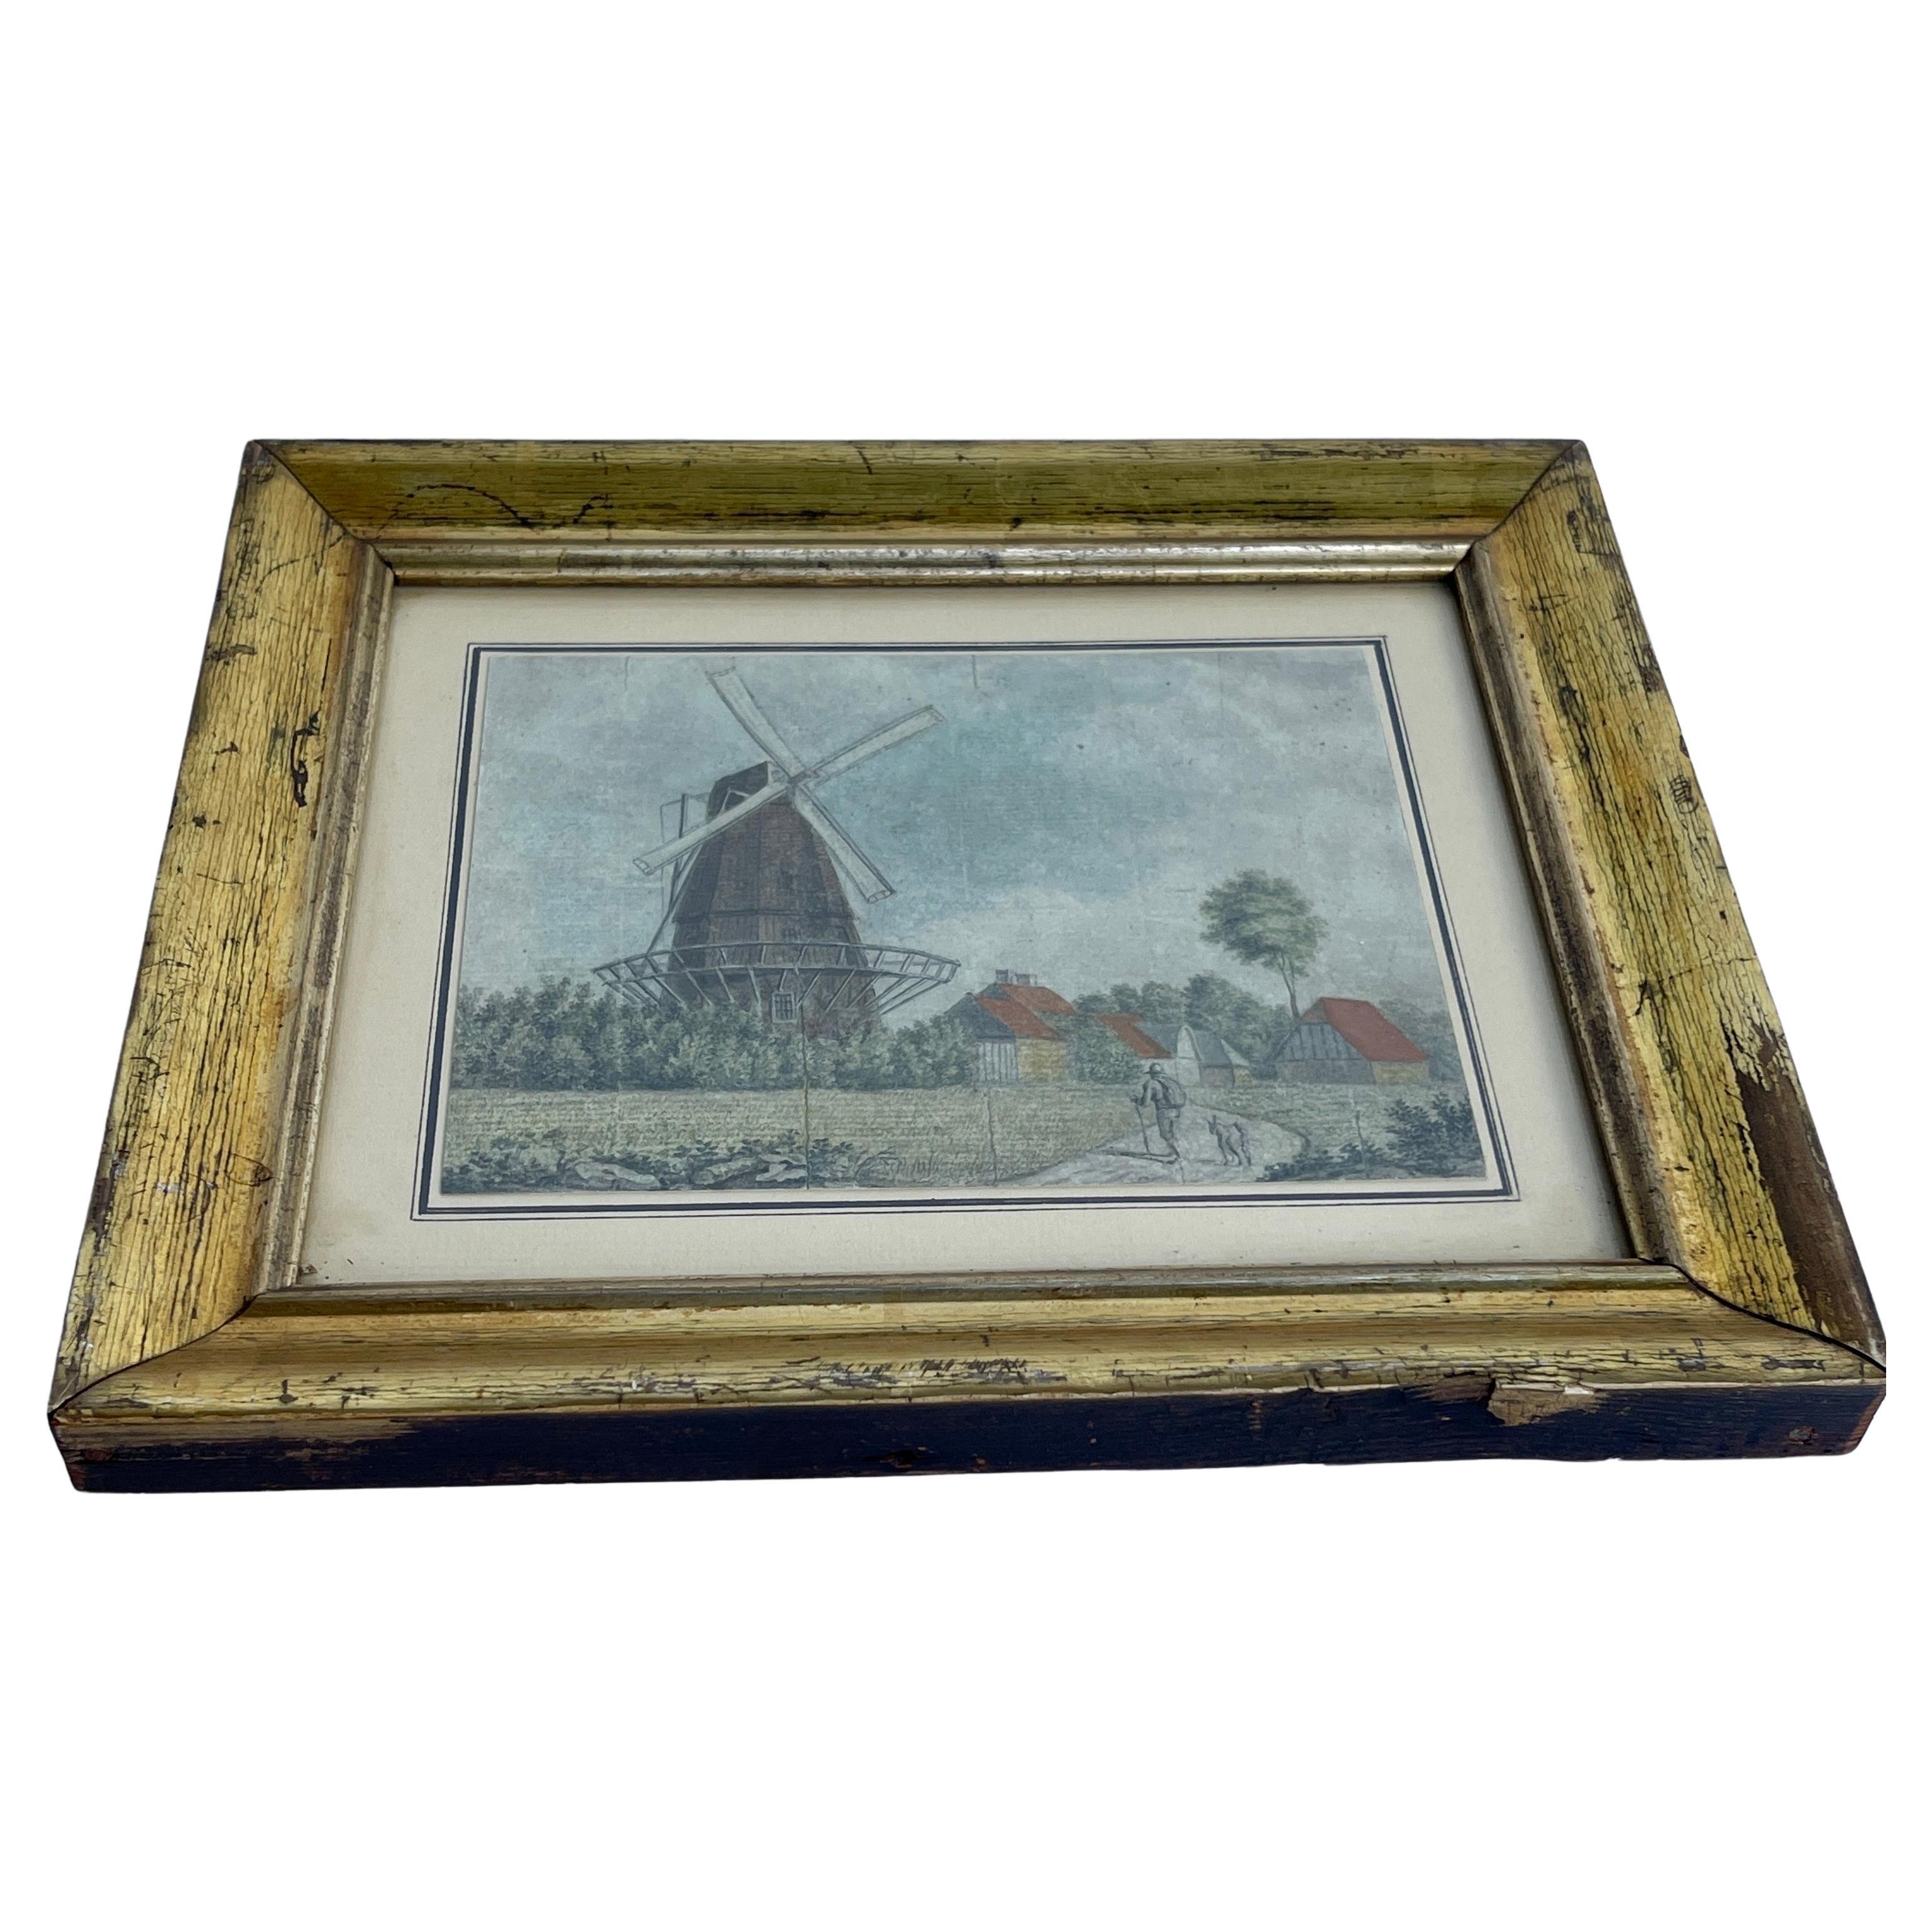 Danish 19th Century Watercoloring Painting of a Windmill in a Period Gilt Wood Frame, Copenhagen circa 1850. 
Signed on the rear, E. L. for EdwardLehman.
Also handwritten in Danish on the rear side: 